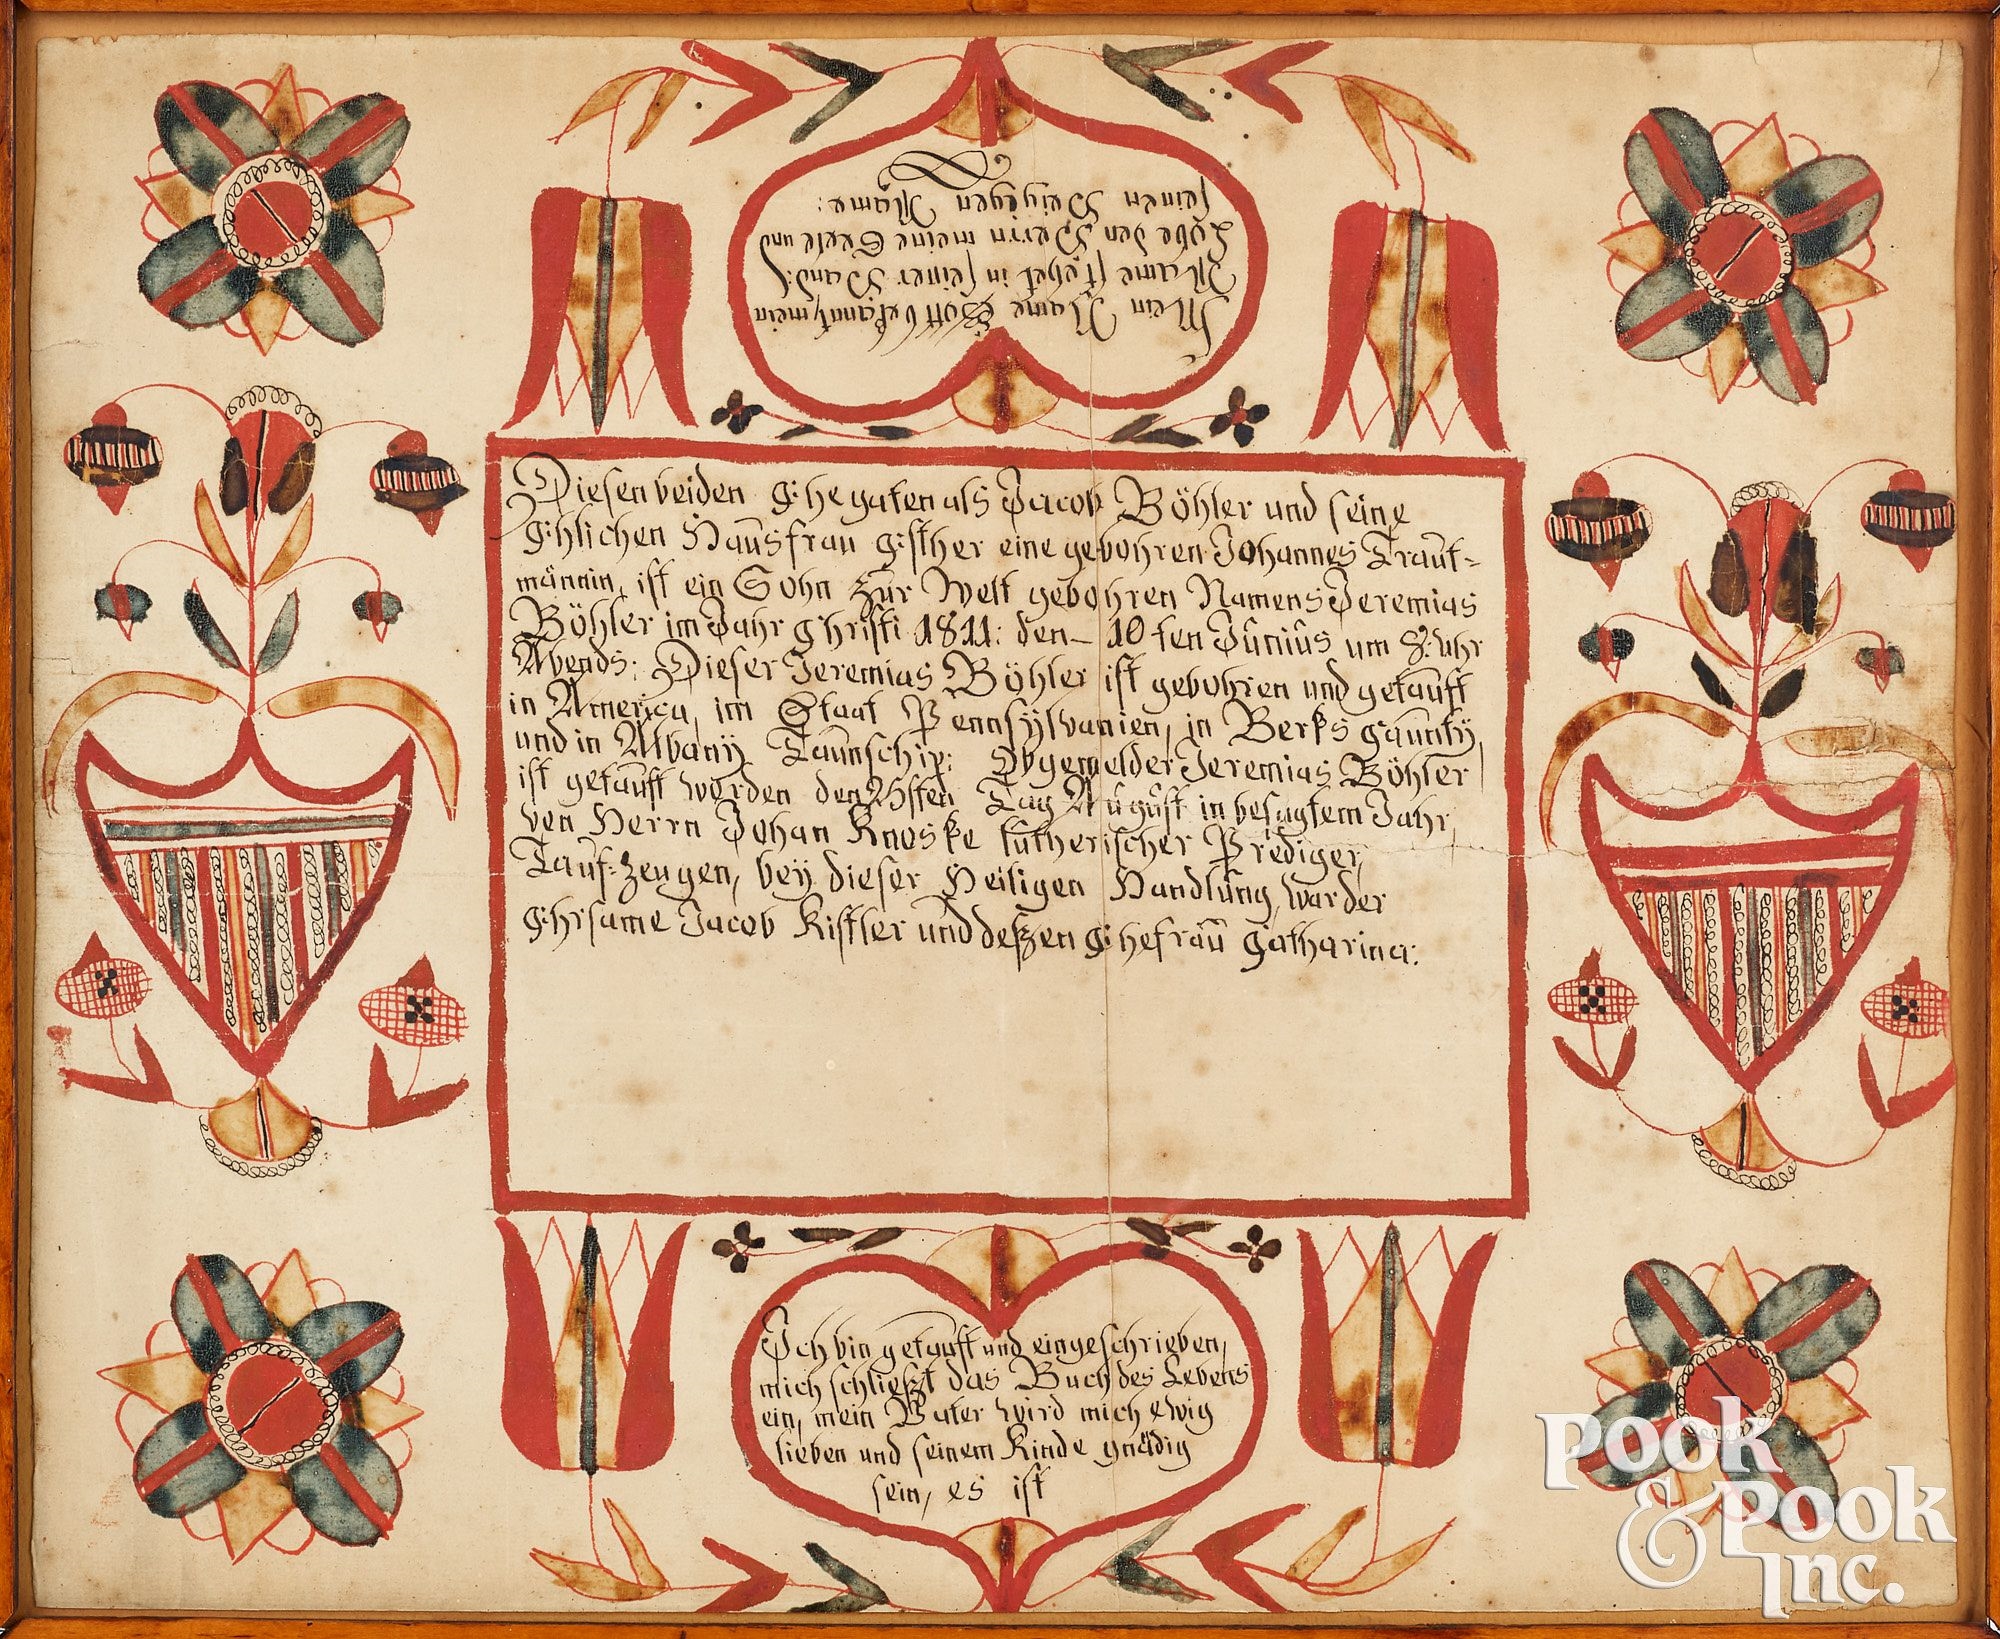 Artwork by Martin Brechall, Martin Brechall fraktur birth certificate, Made of ink and watercolor